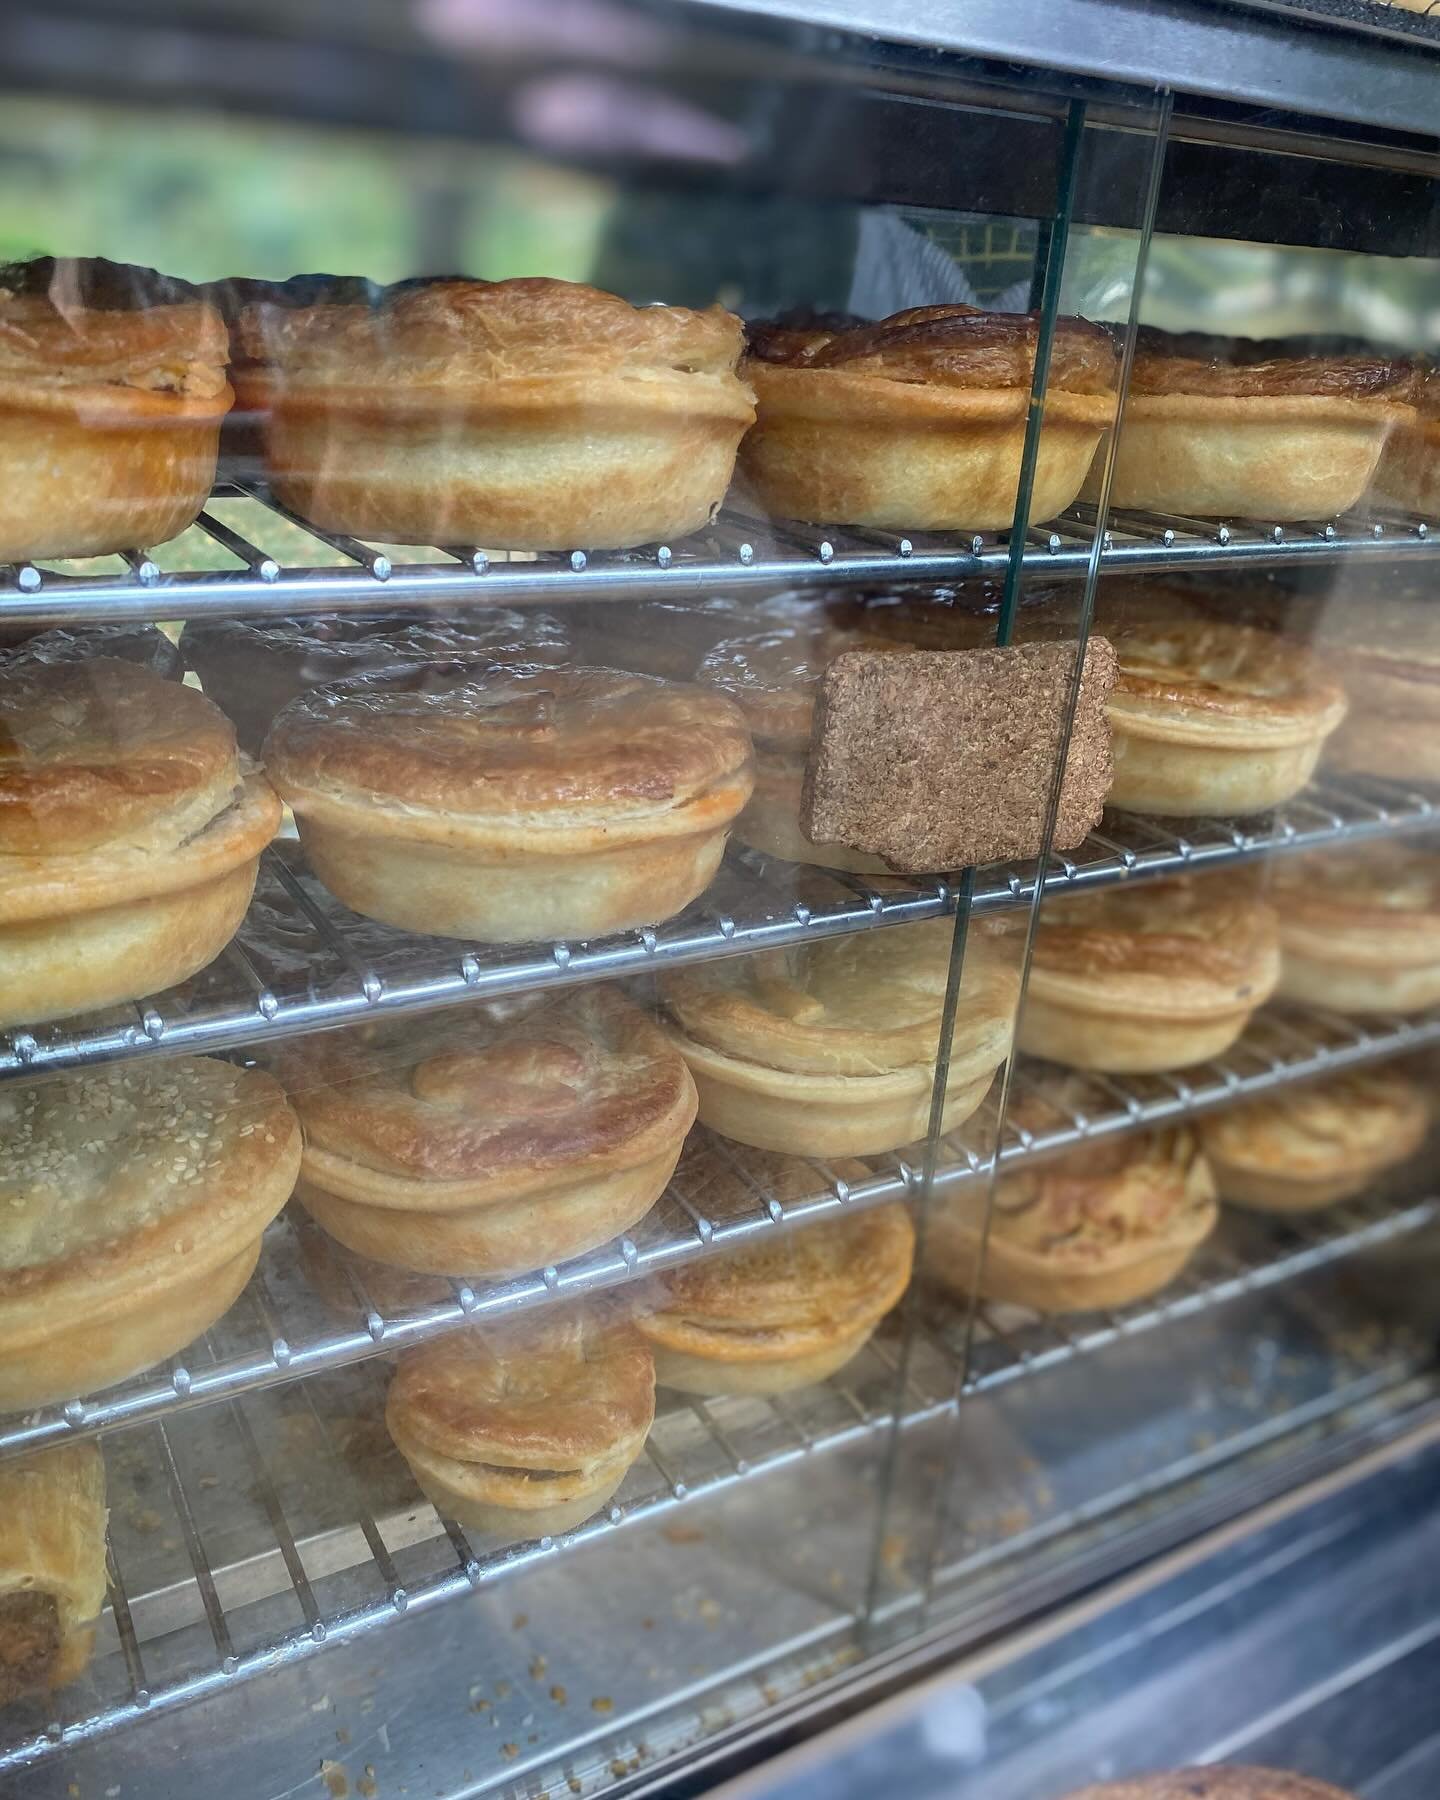 If you want something warm and toasty tomorrow morning come and grab a pie from @hoperiverpies 

For more than 18 years Craig Minehan has been baking pies for the people of Christchurch &amp; Lyttelton. 
​
Formerly the Bridge Street Bakehouse, Hope R